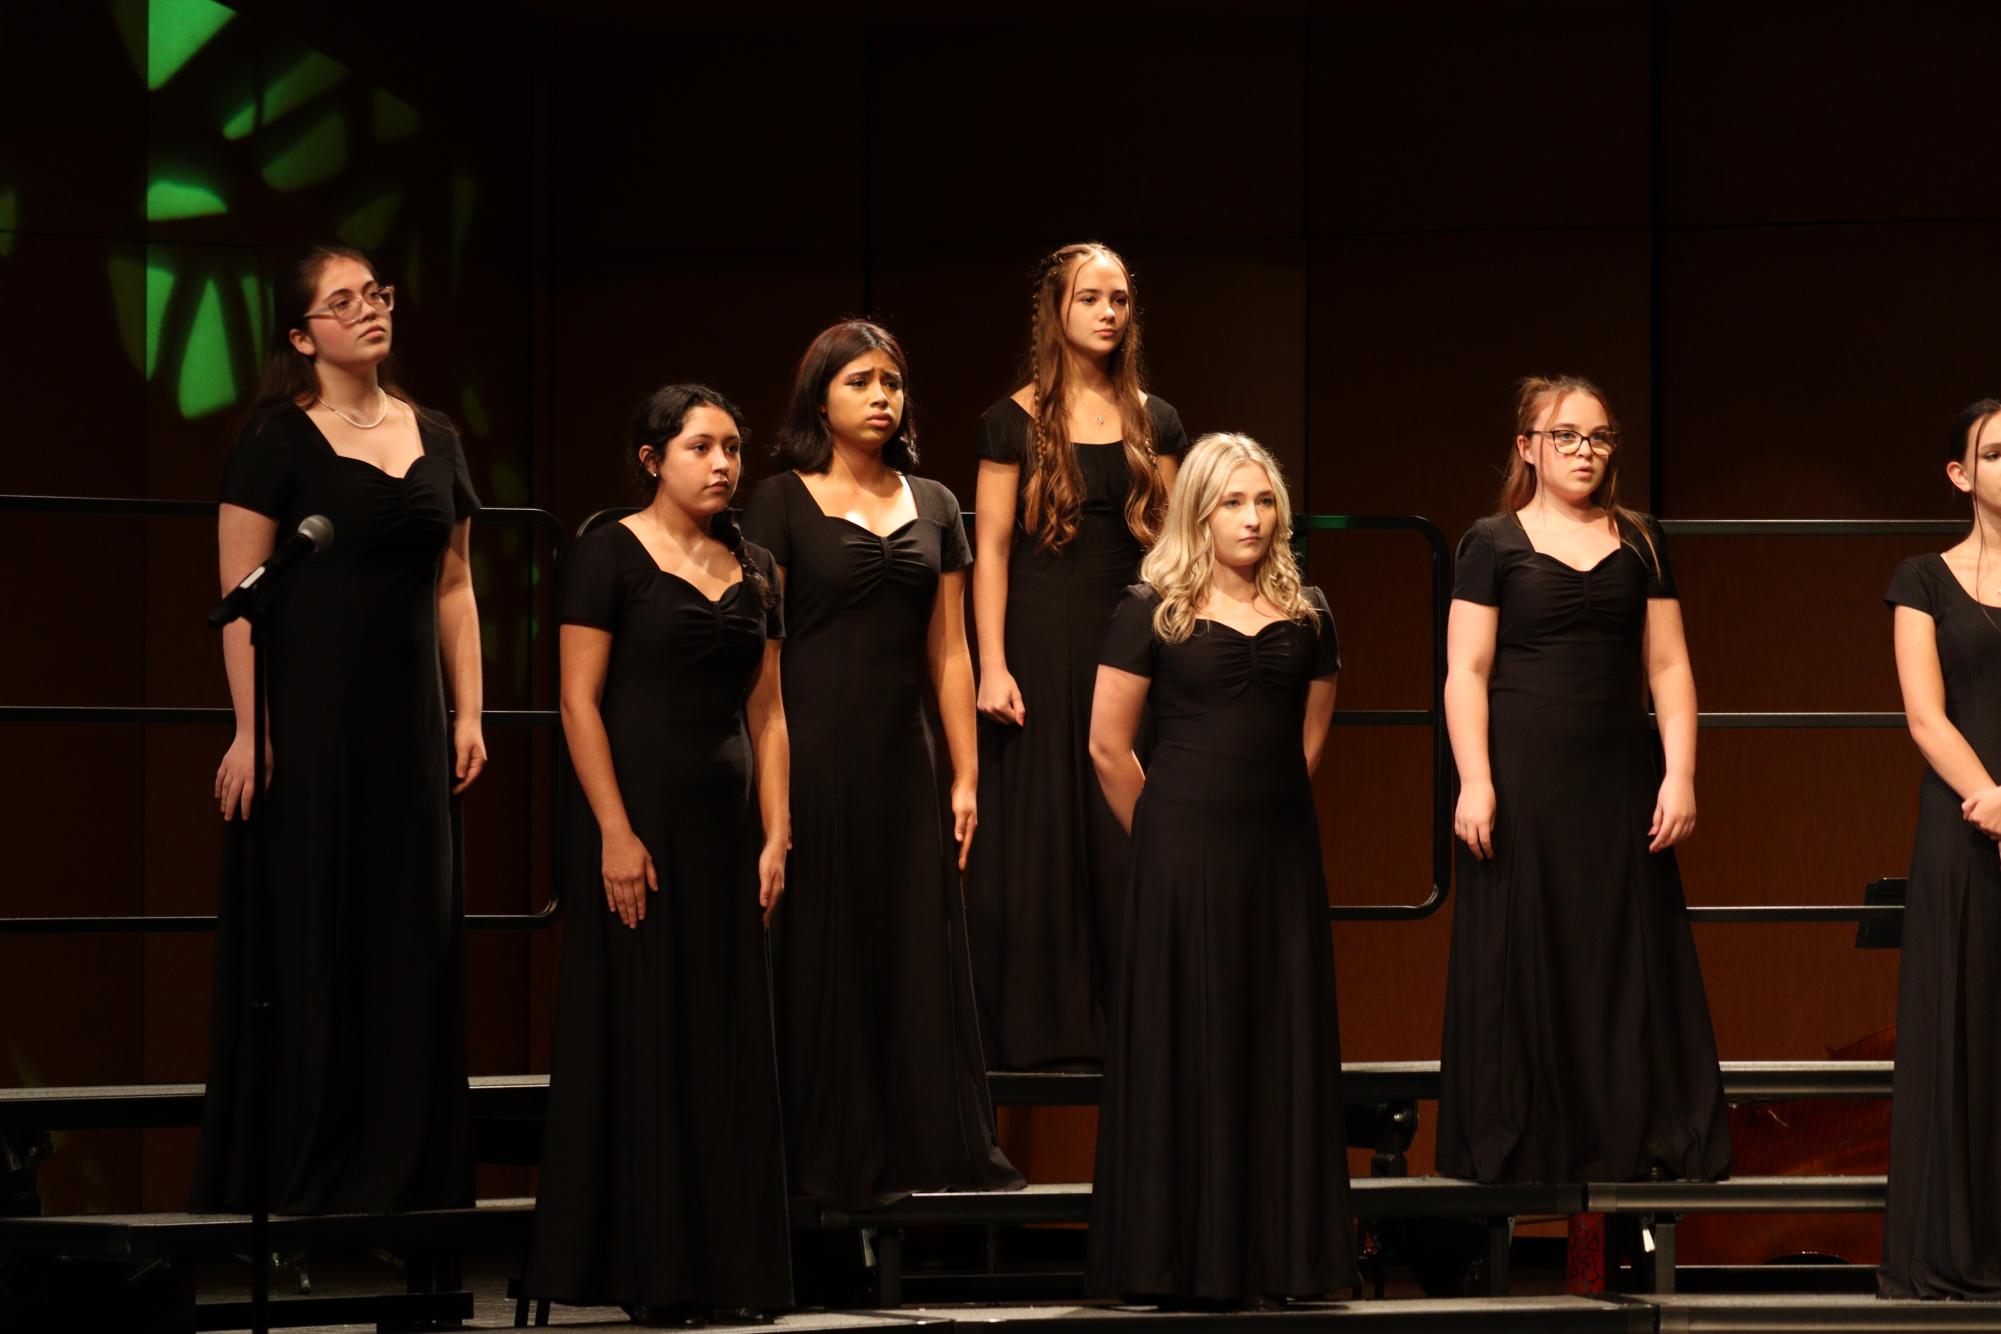 Choirs+annual+fall+concert+leads+students+into+October+break